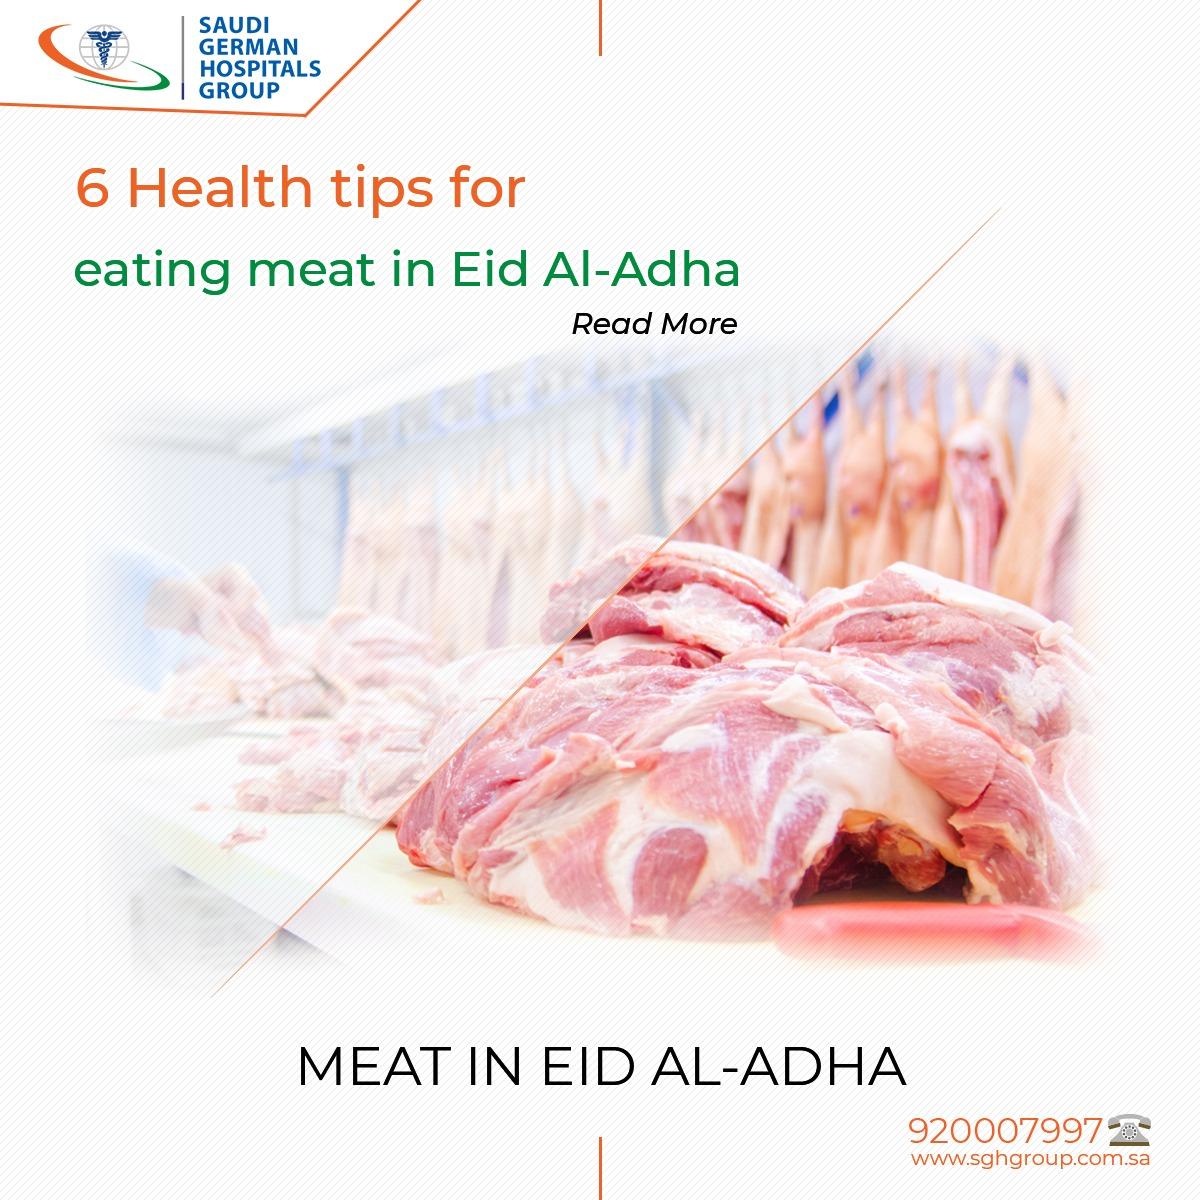 6 Health tips for eating meat in Eid Al-Adha